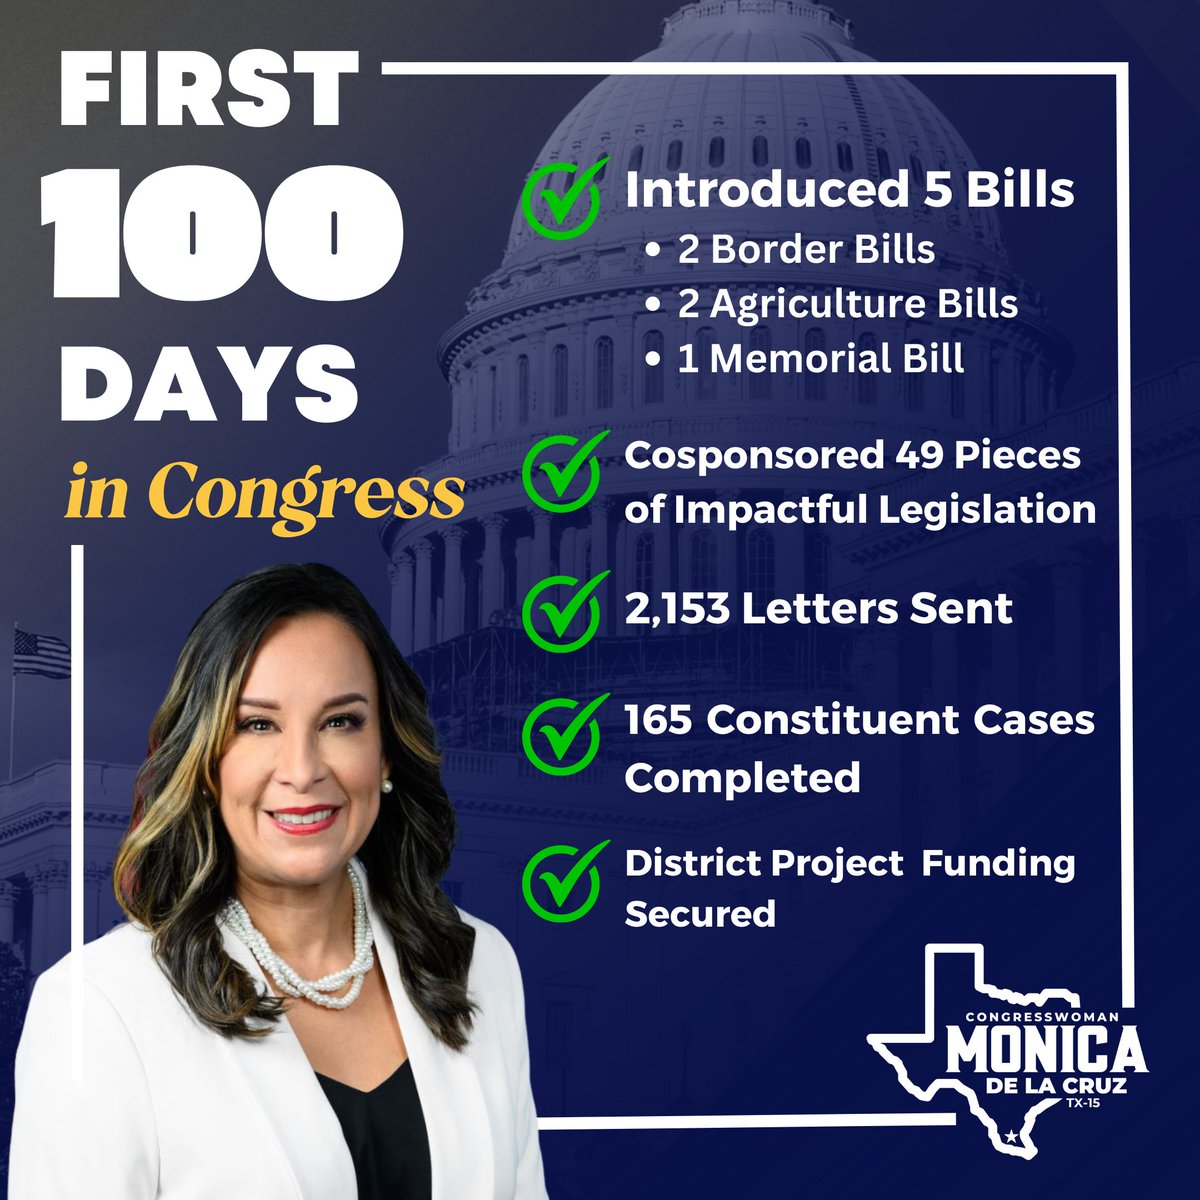 It is official. It has been 100 days since my swearing in for the 118th Congress. I am proud of the opportunity to serve Texas' 15th Congressional District. Let's keep going. 🇺🇸💪